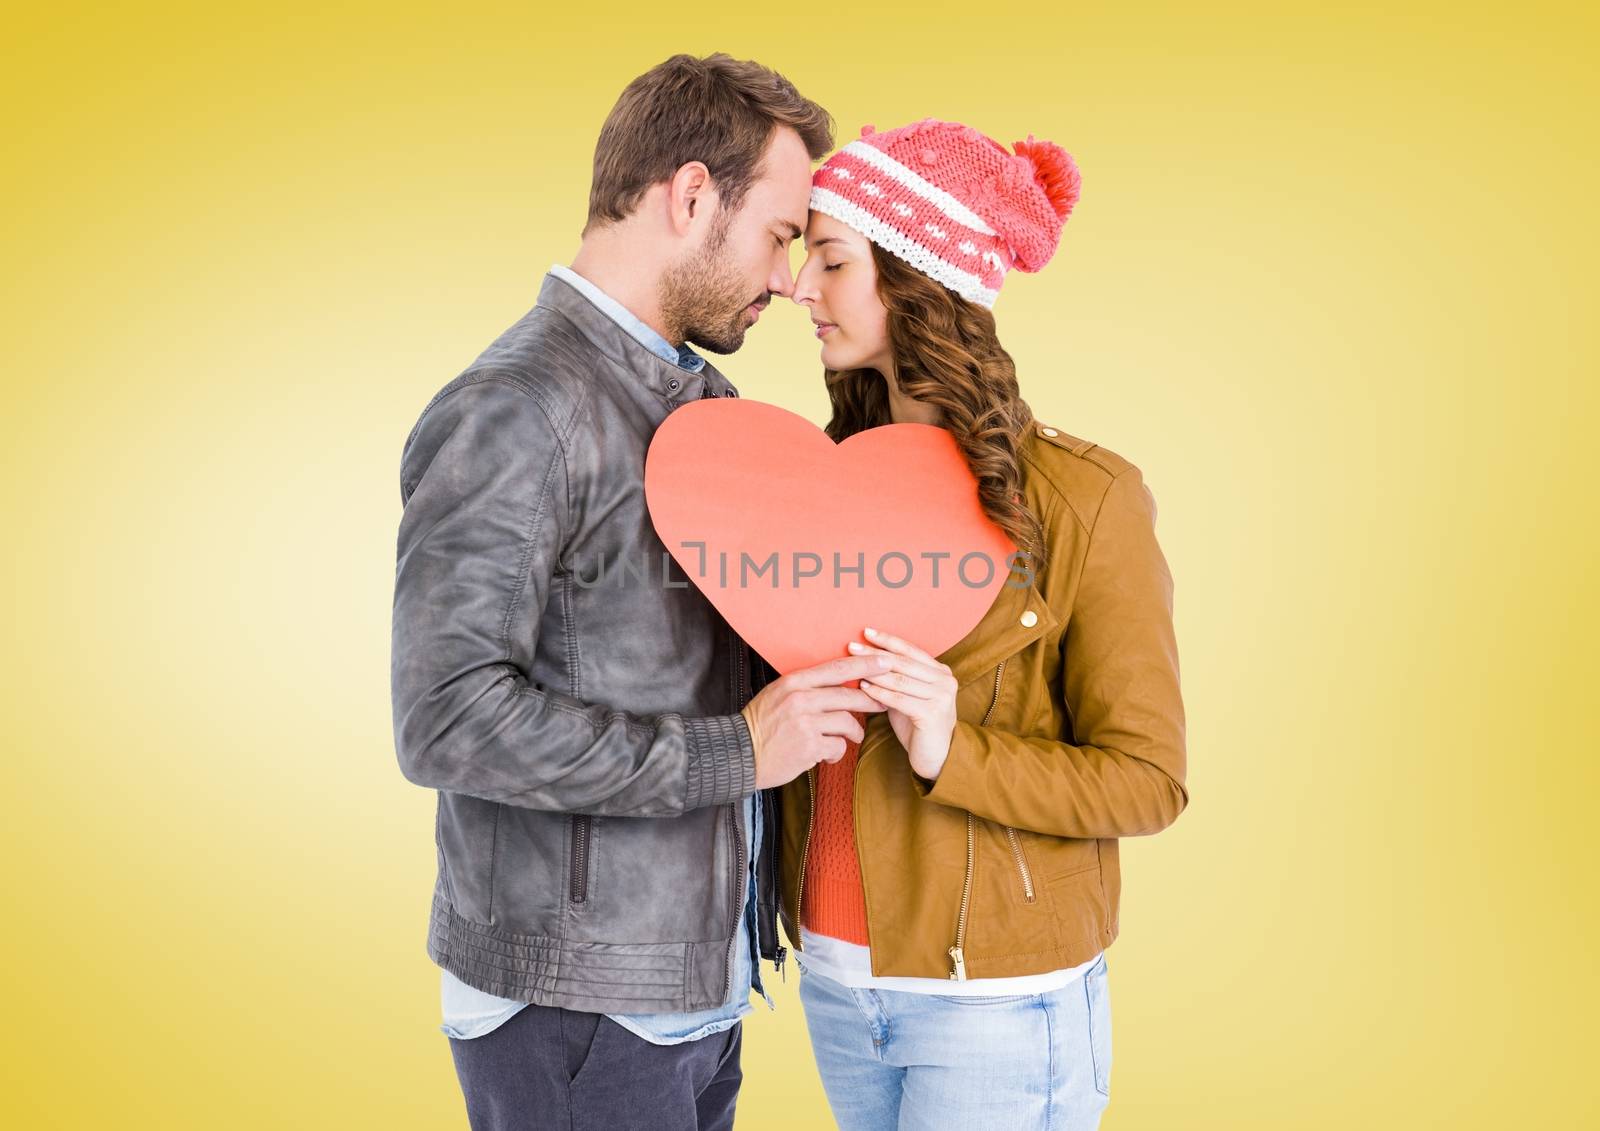 Romantic couple holding a heart against yellow background